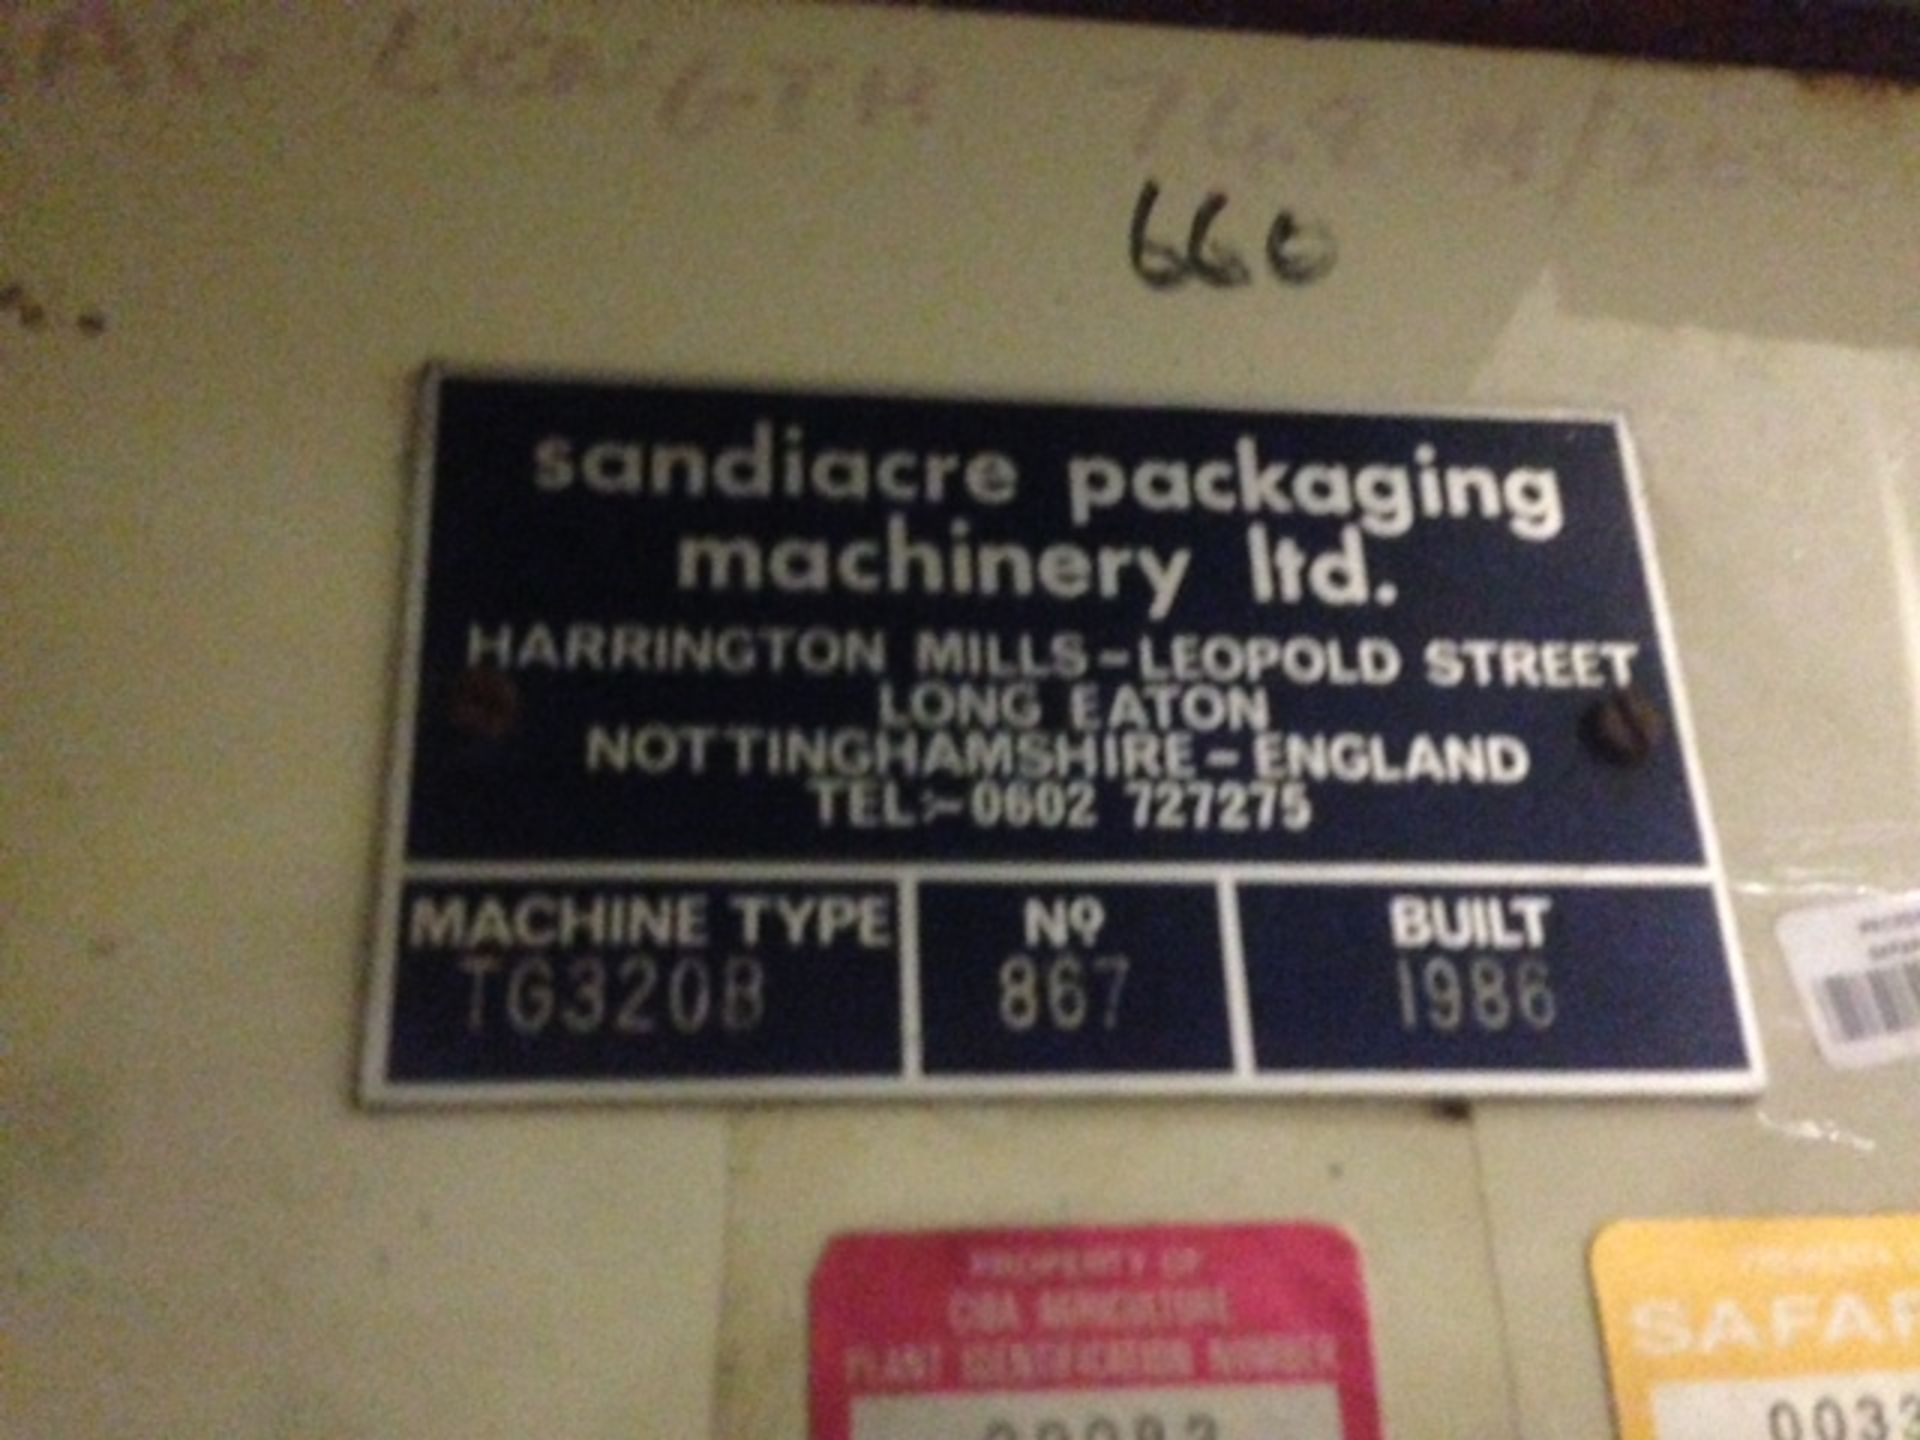 * A 1986 Sandiacre Type TG320B Vertical Pillow Packaging Machine No. 867; with Computerized - Image 2 of 3